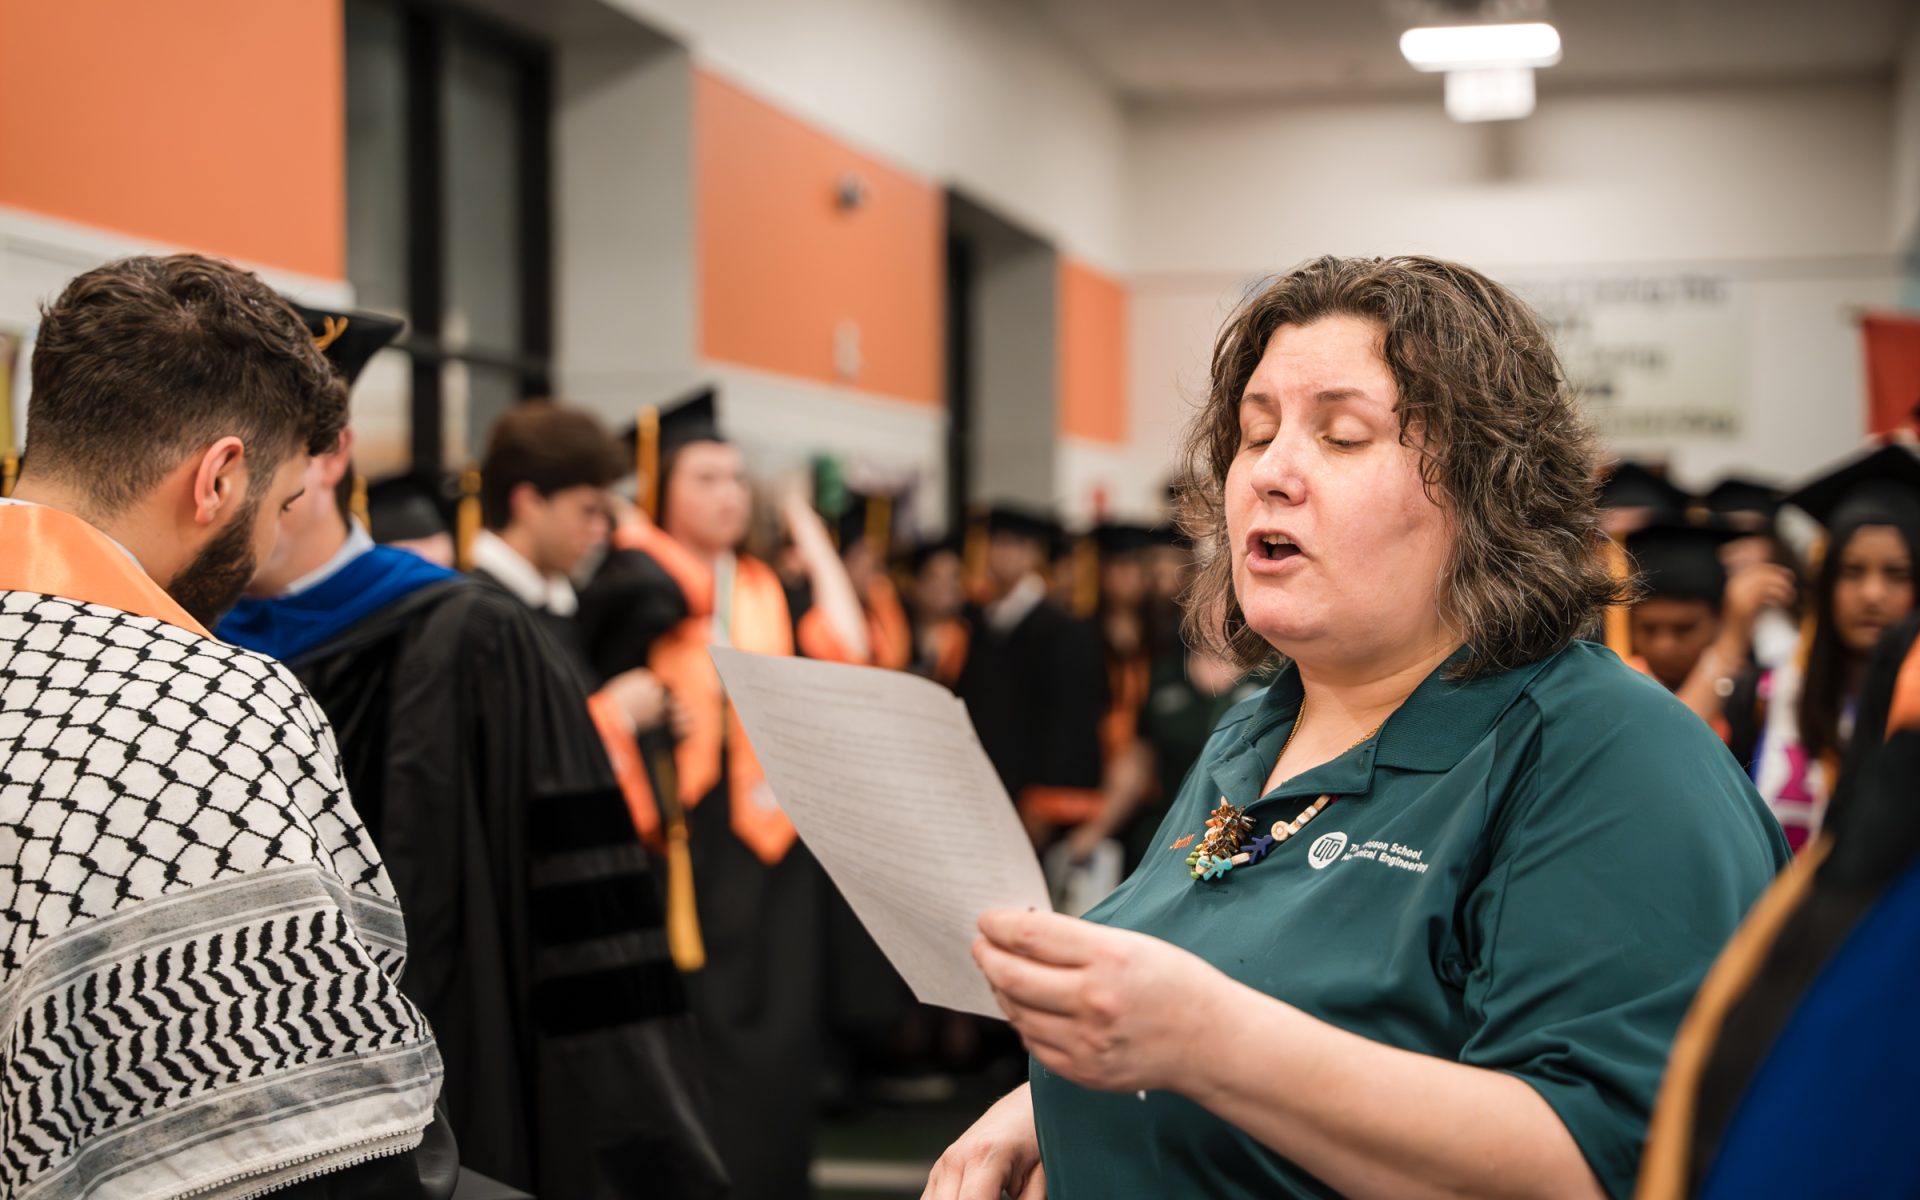 Jennifer Klunk and many staff members across the Jonsson School volunteered for a full day to support graduates at three commencement ceremonies.